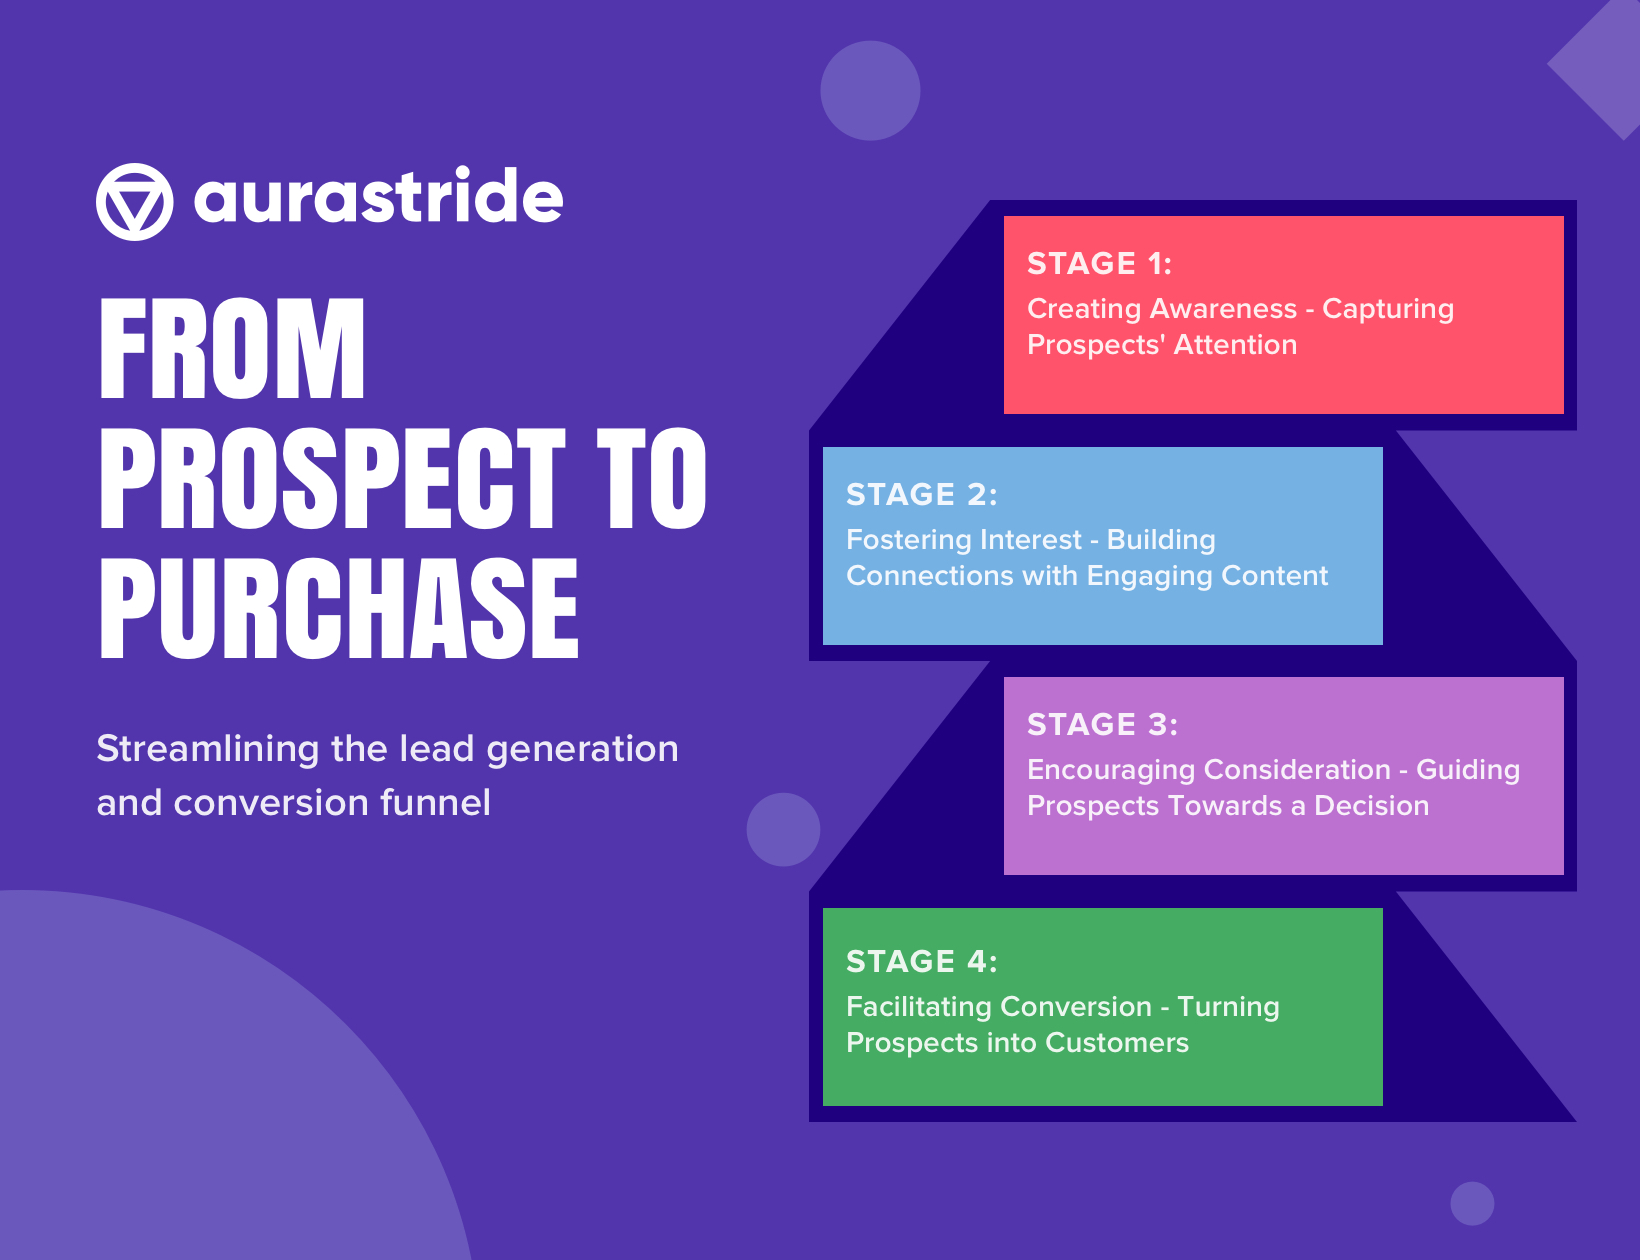 From prospect to purchase: Streamlining the lead generation and conversion funnel